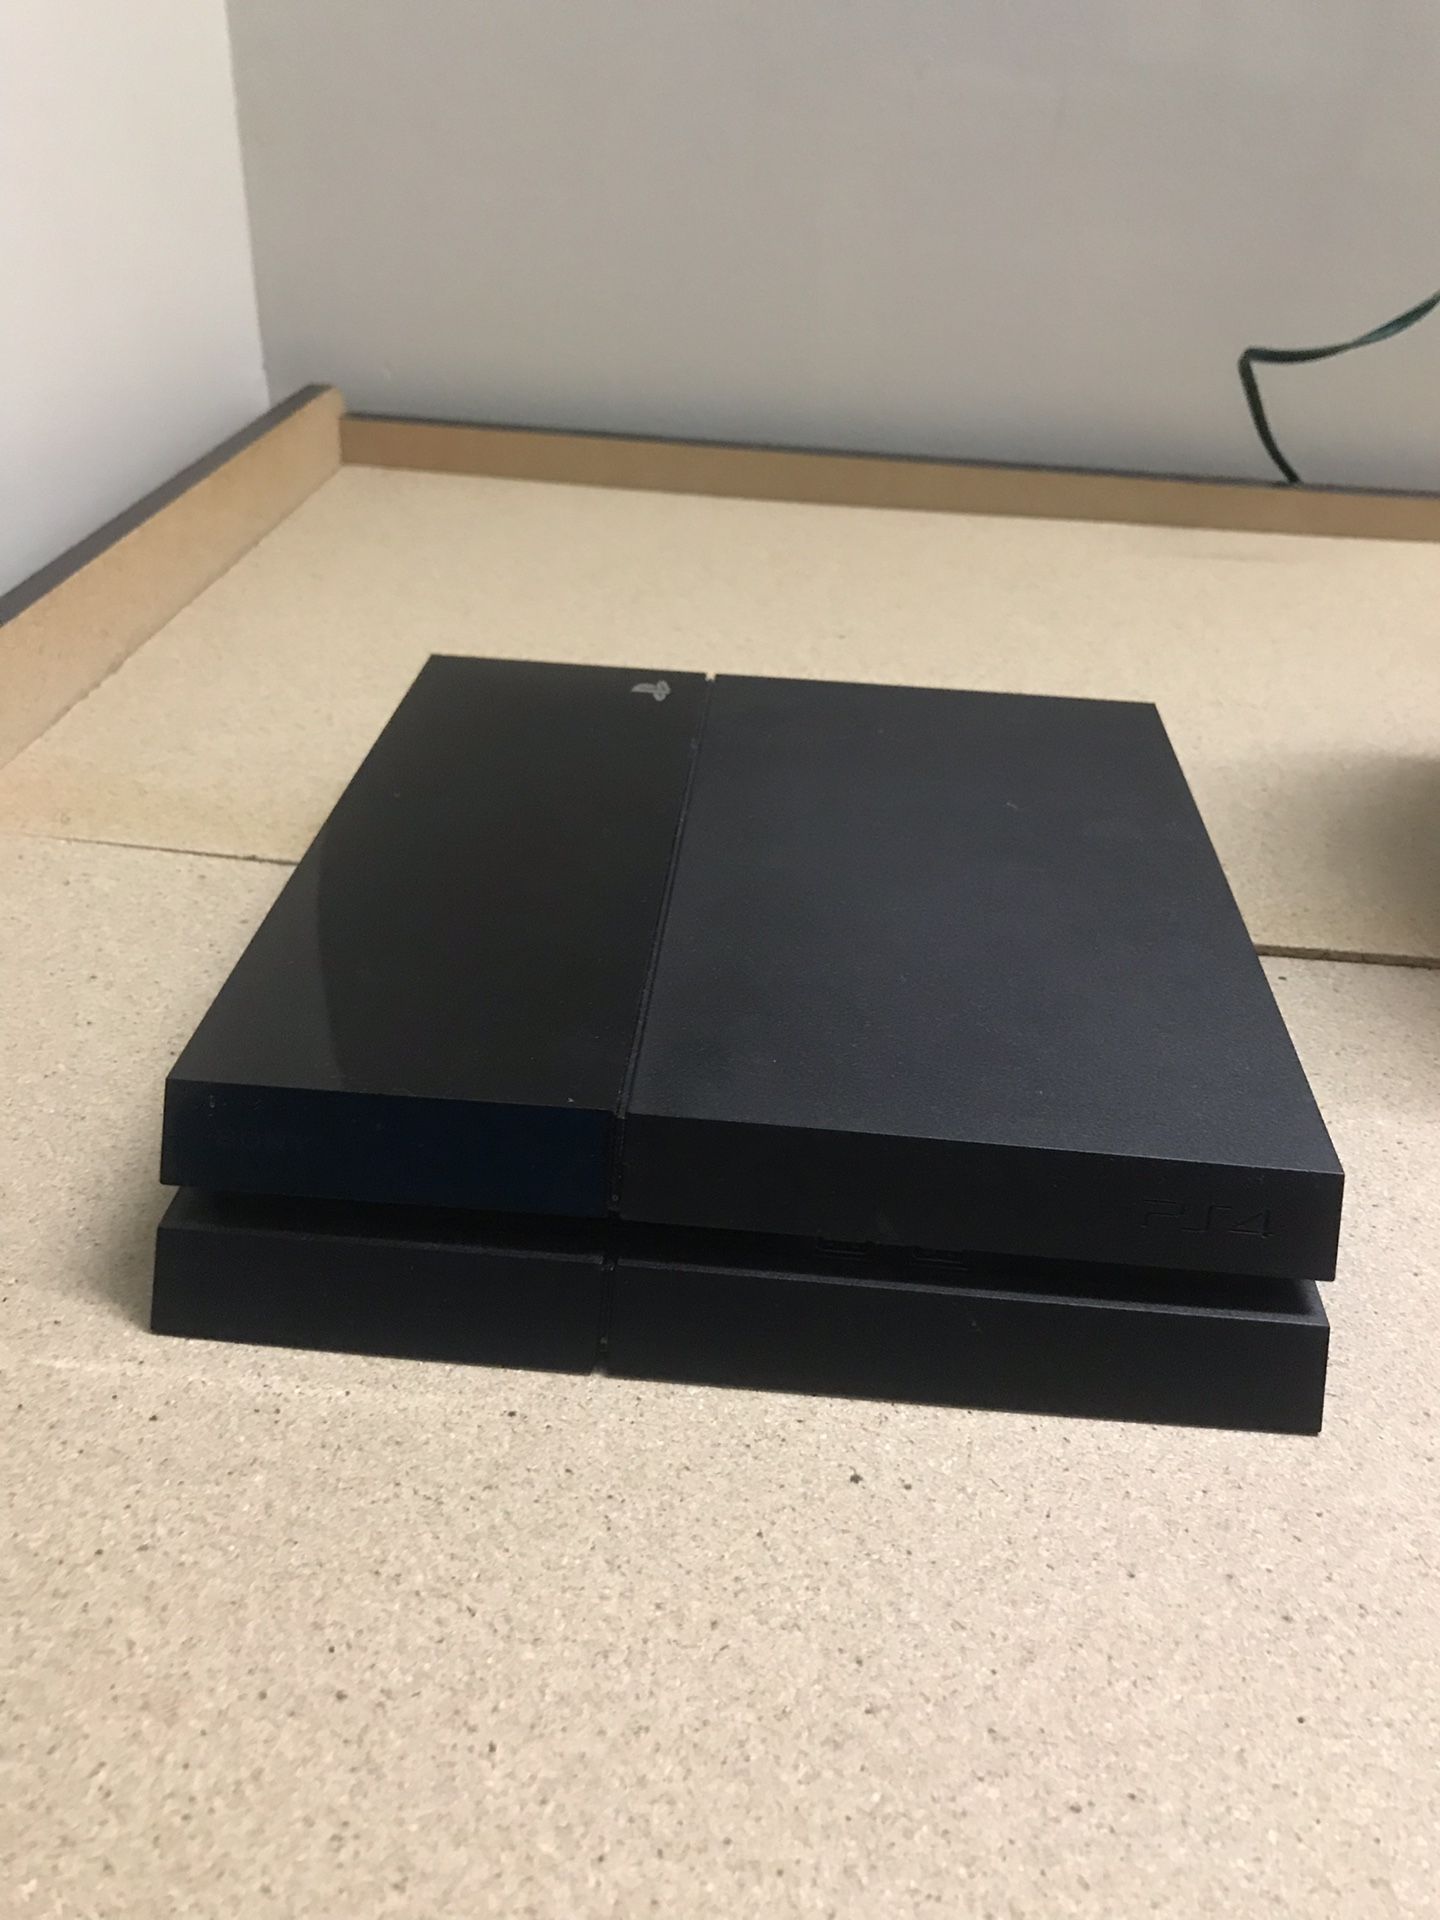 PlayStation 4 (turns off instantly)